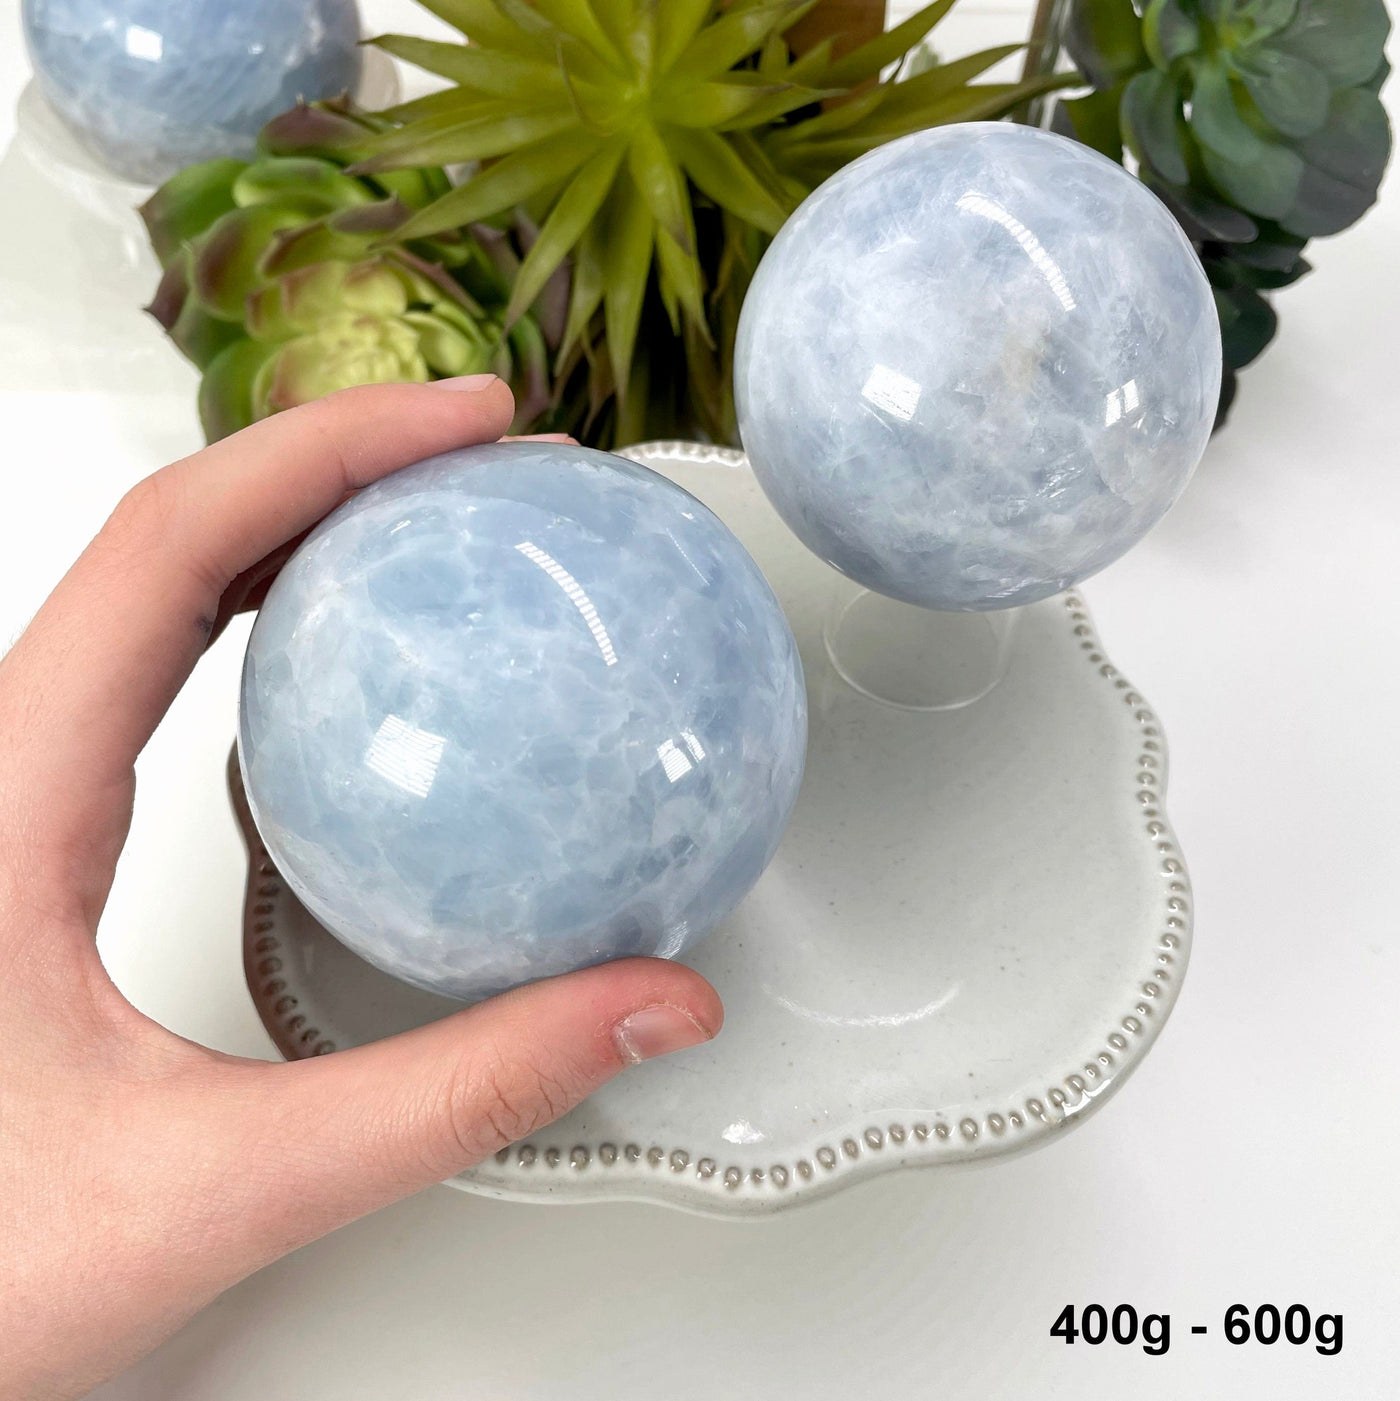 two 400g - 600g blue calcite spheres on display for possible variations with one in hand for size reference